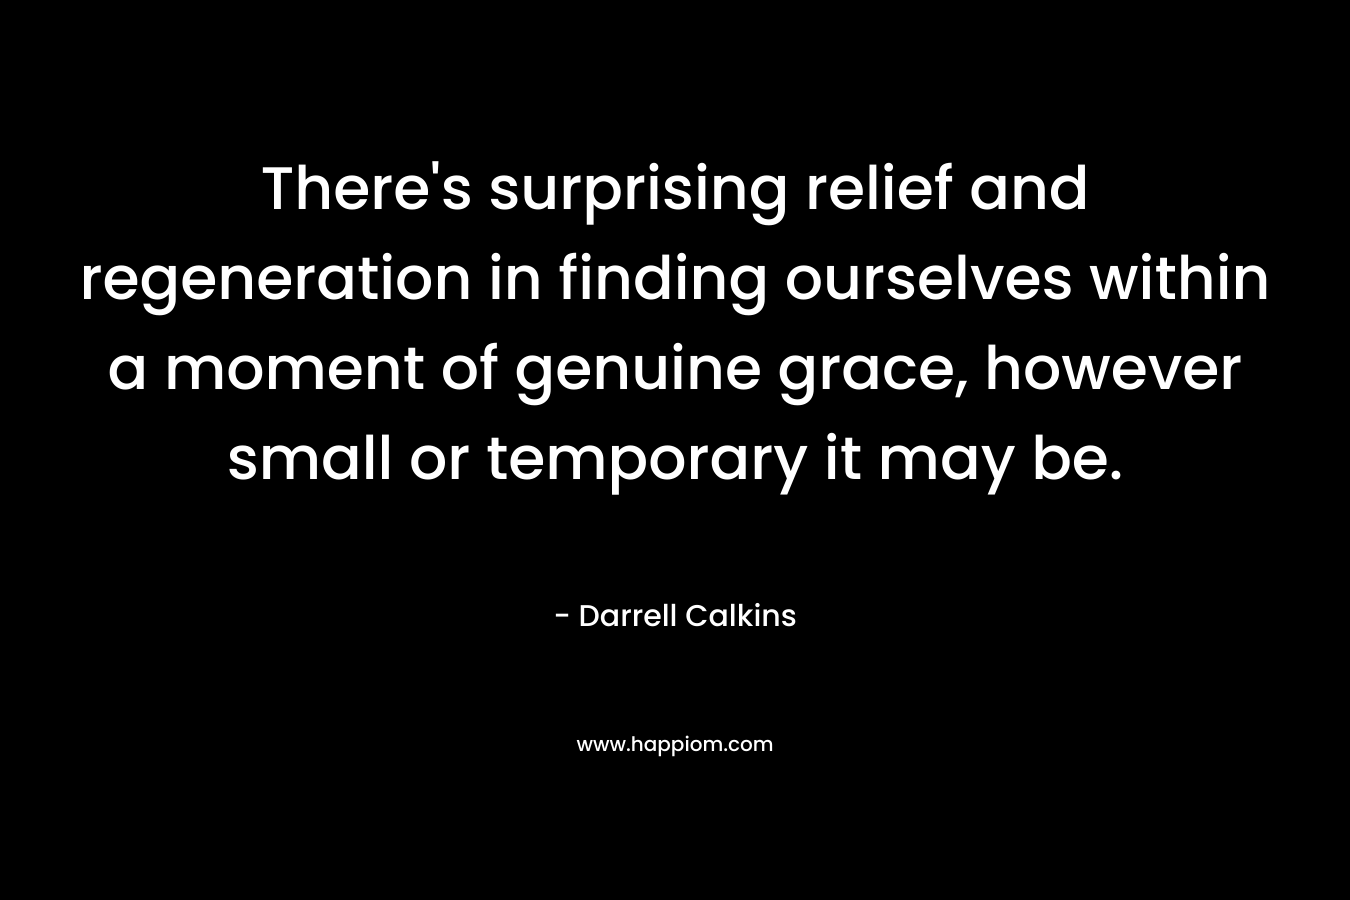 There’s surprising relief and regeneration in finding ourselves within a moment of genuine grace, however small or temporary it may be. – Darrell Calkins